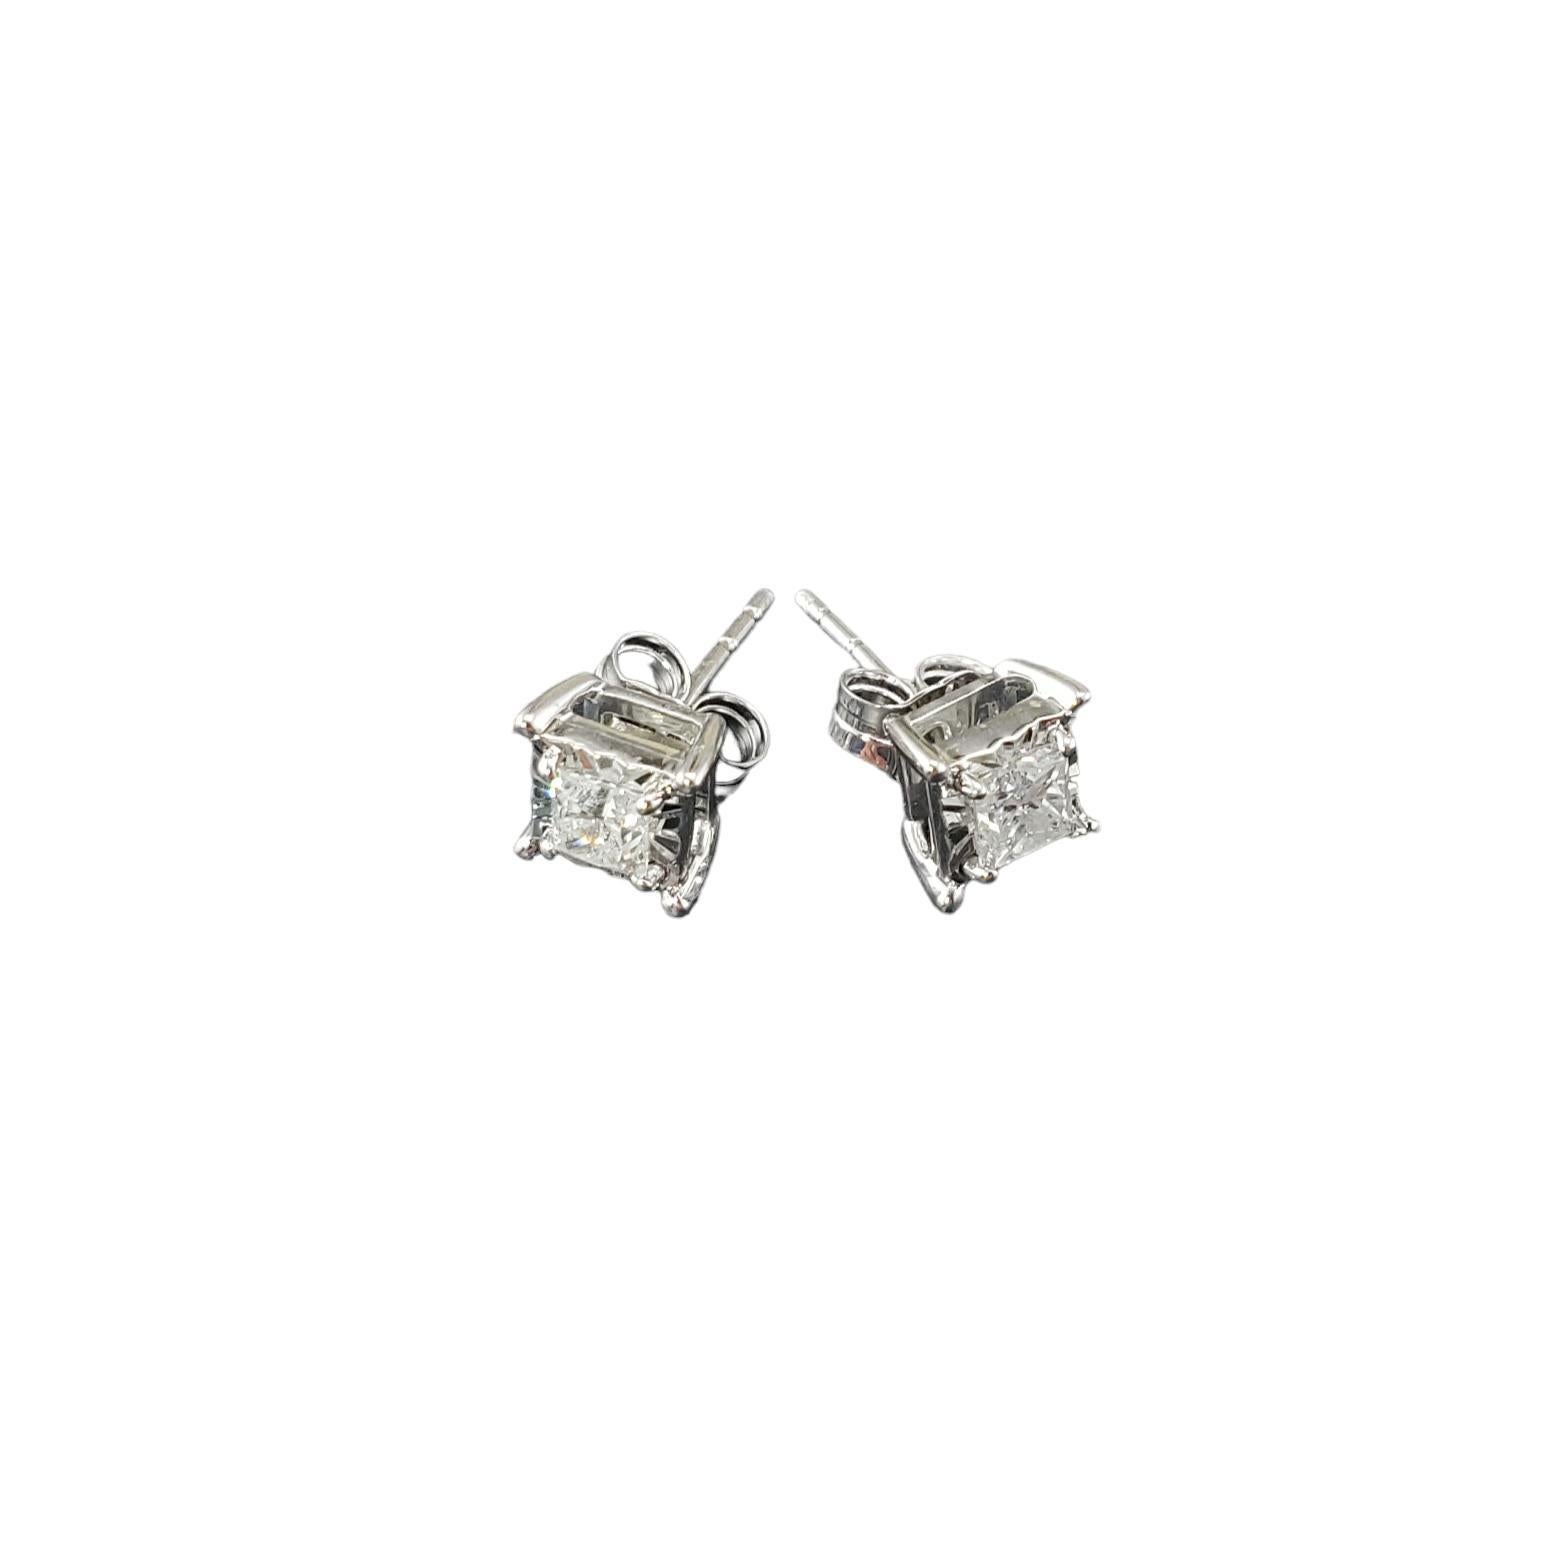 10 Karat White Gold and Diamond Stud Earrings-

These sparkling stud earrings each feature one princess cut diamond set in classic 14K white gold.  Push back closures.

Approximate total diamond weight:  .50 ct.

Diamond color: I

Diamond clarity: